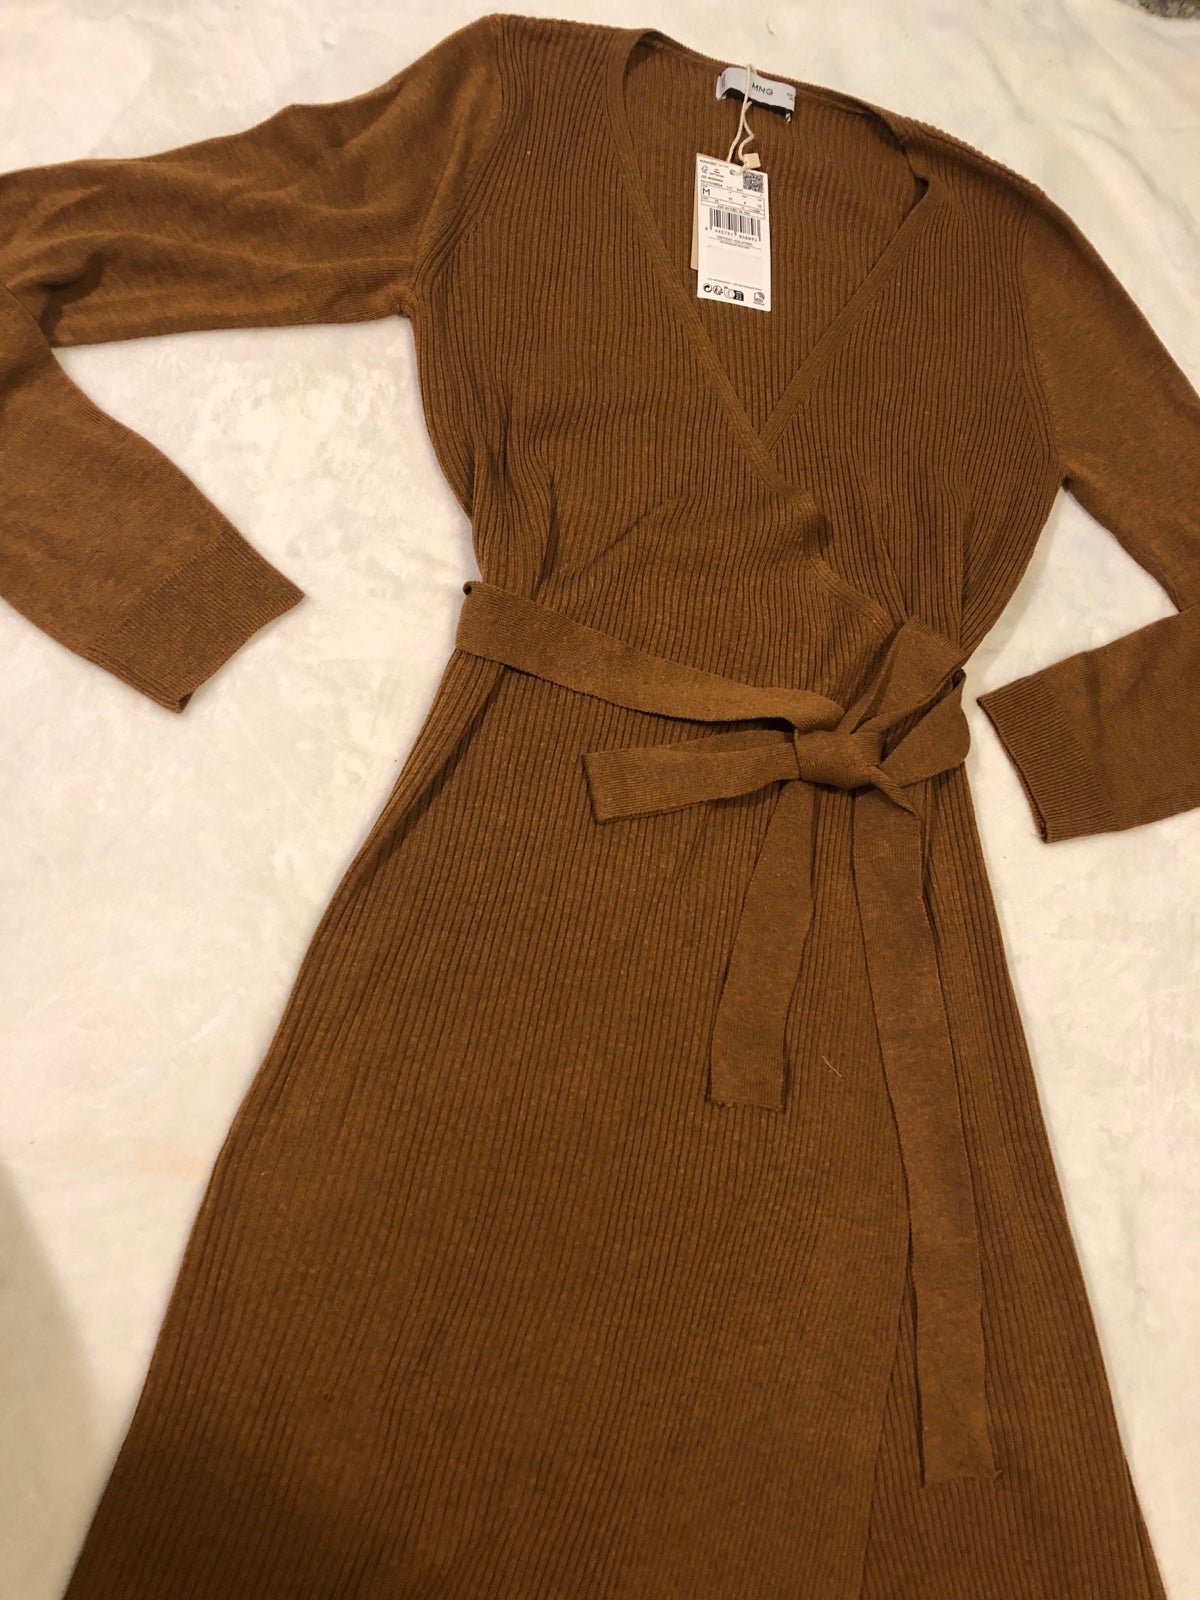 save up to 70% New with tag Mango MNG Bow knitted dress wrap shirt dress, size medium, size 6 hQCZeWeH9 all for you